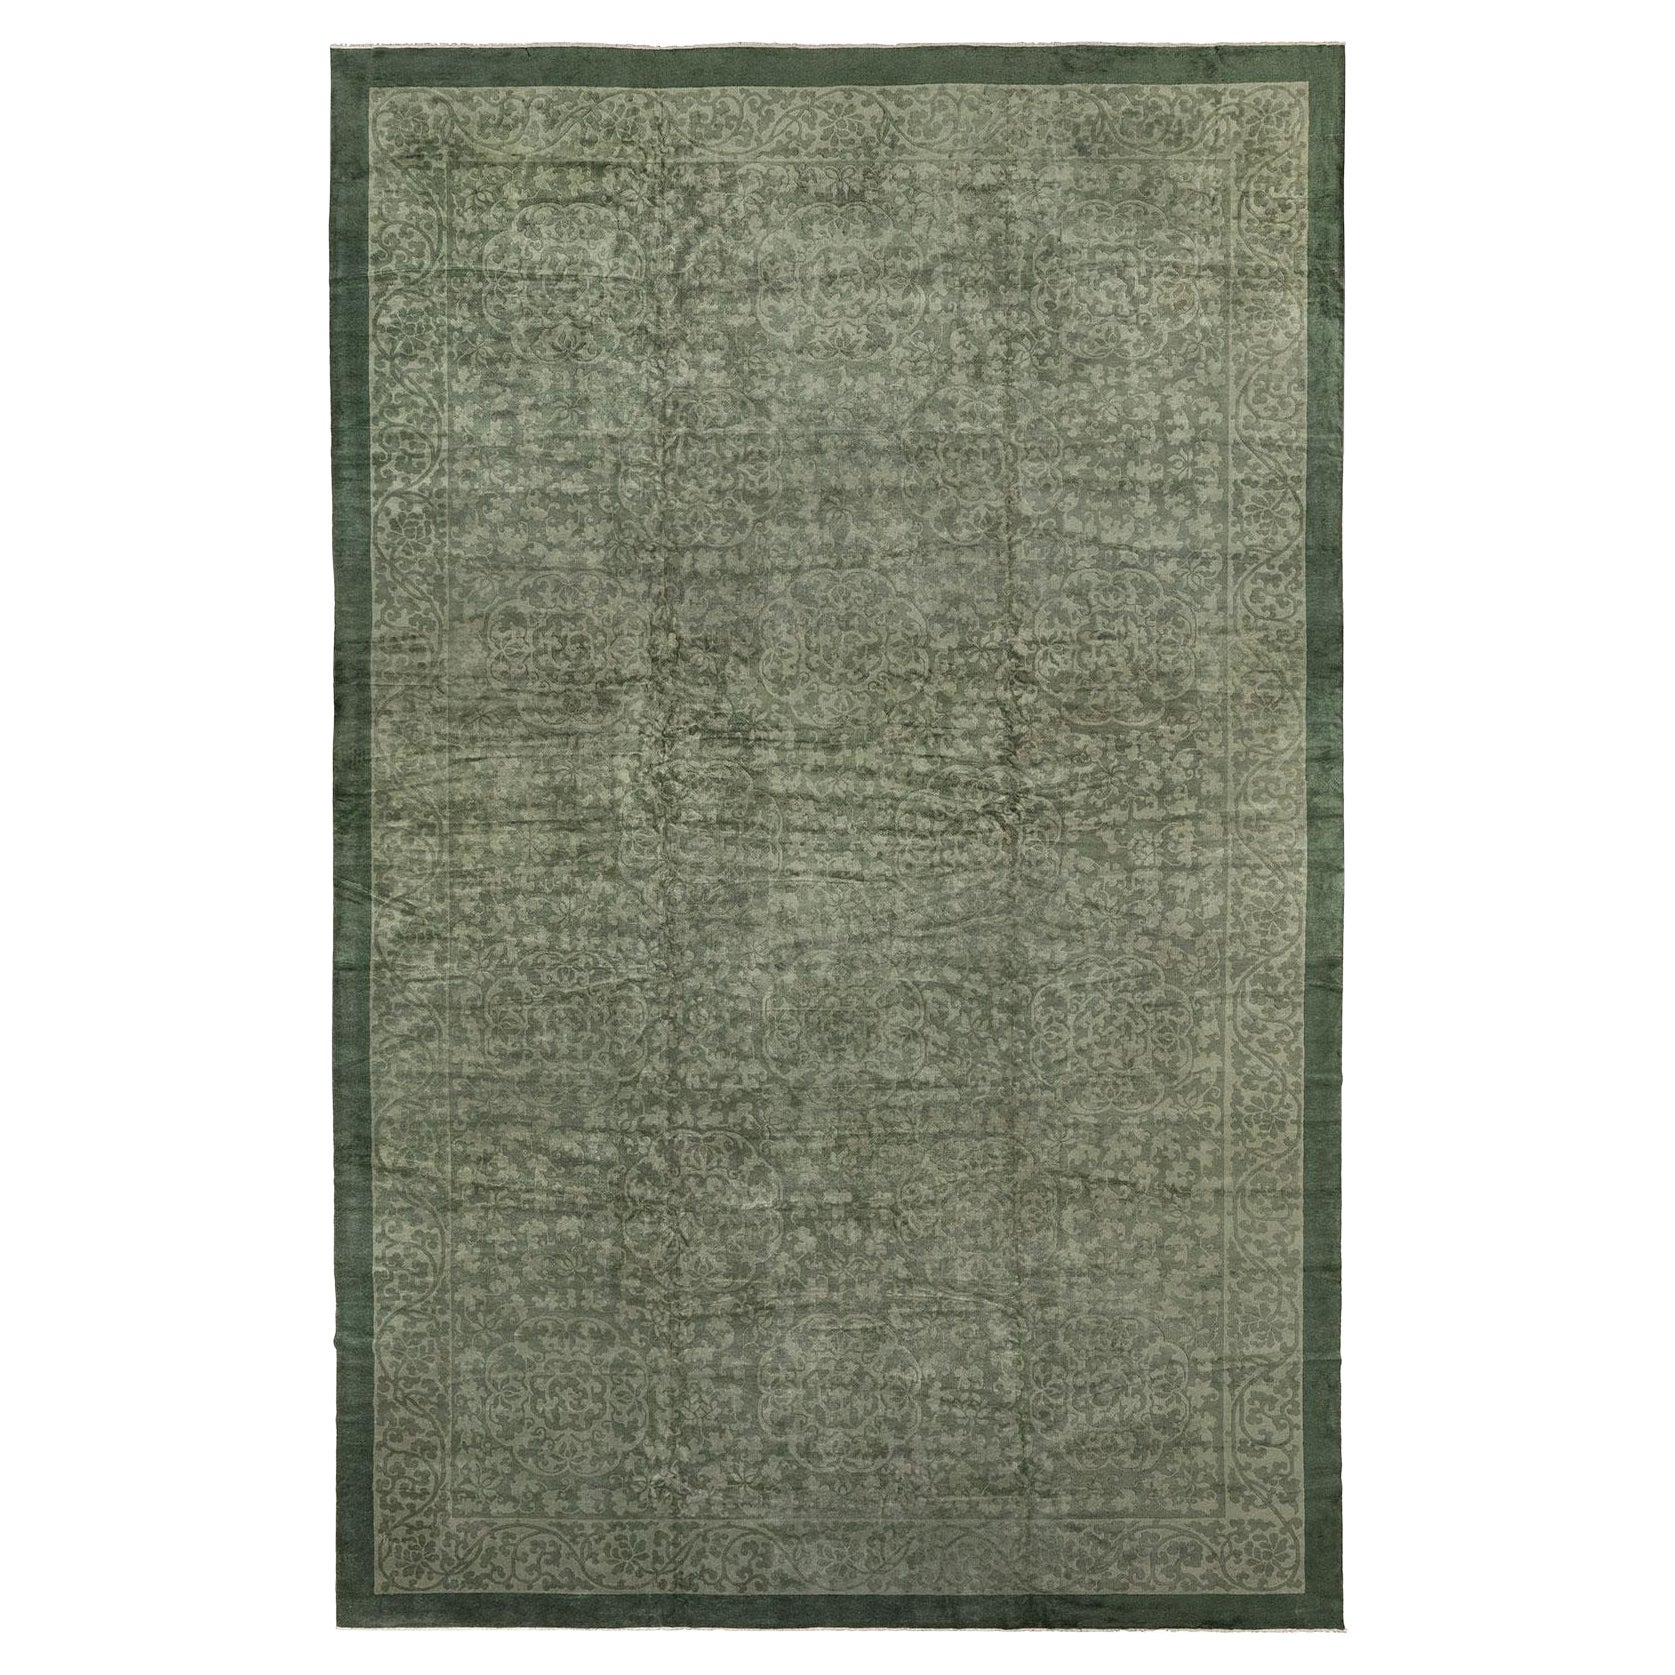 Large Antique Green Chinese Rug